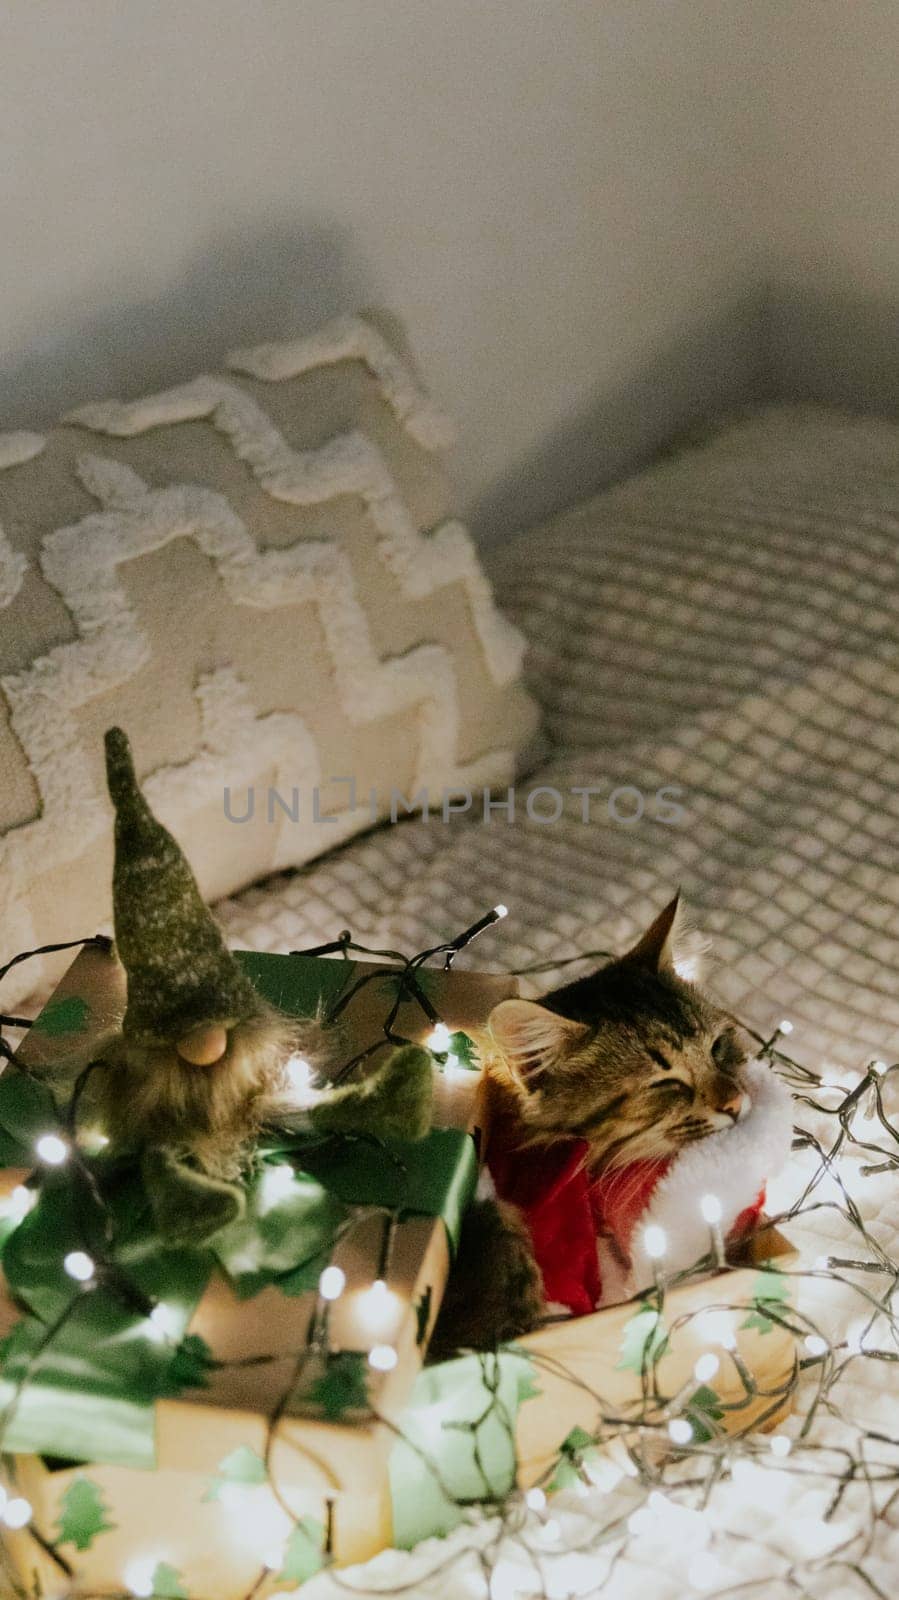 Portrait of one small brown fluffy kitten in a Santa Claus costume sleeping in a gift craft box with a large green bow, a gnome toy and a burning garland around on the sofa at night, close-up side view.